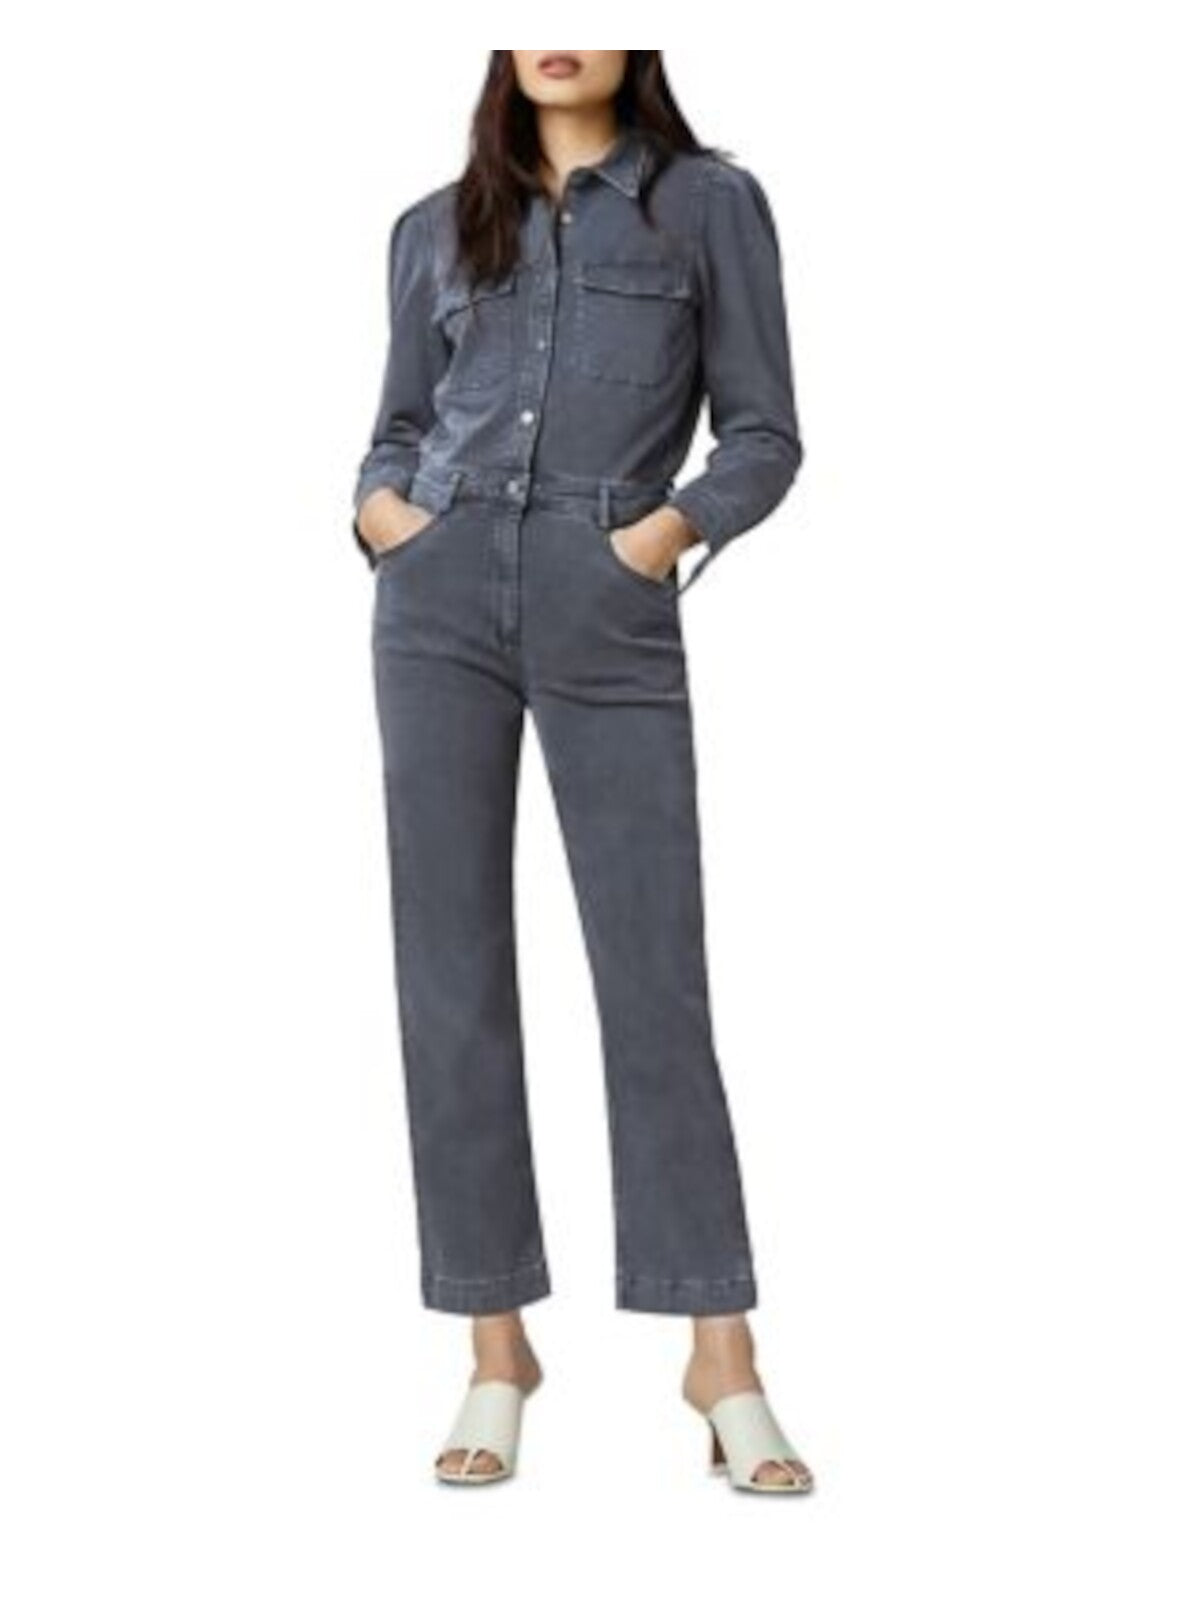 DL1961 Womens Gray Stretch Pocketed Zippered Front Snap Coveralls Long Sleeve Collared Jumpsuit L